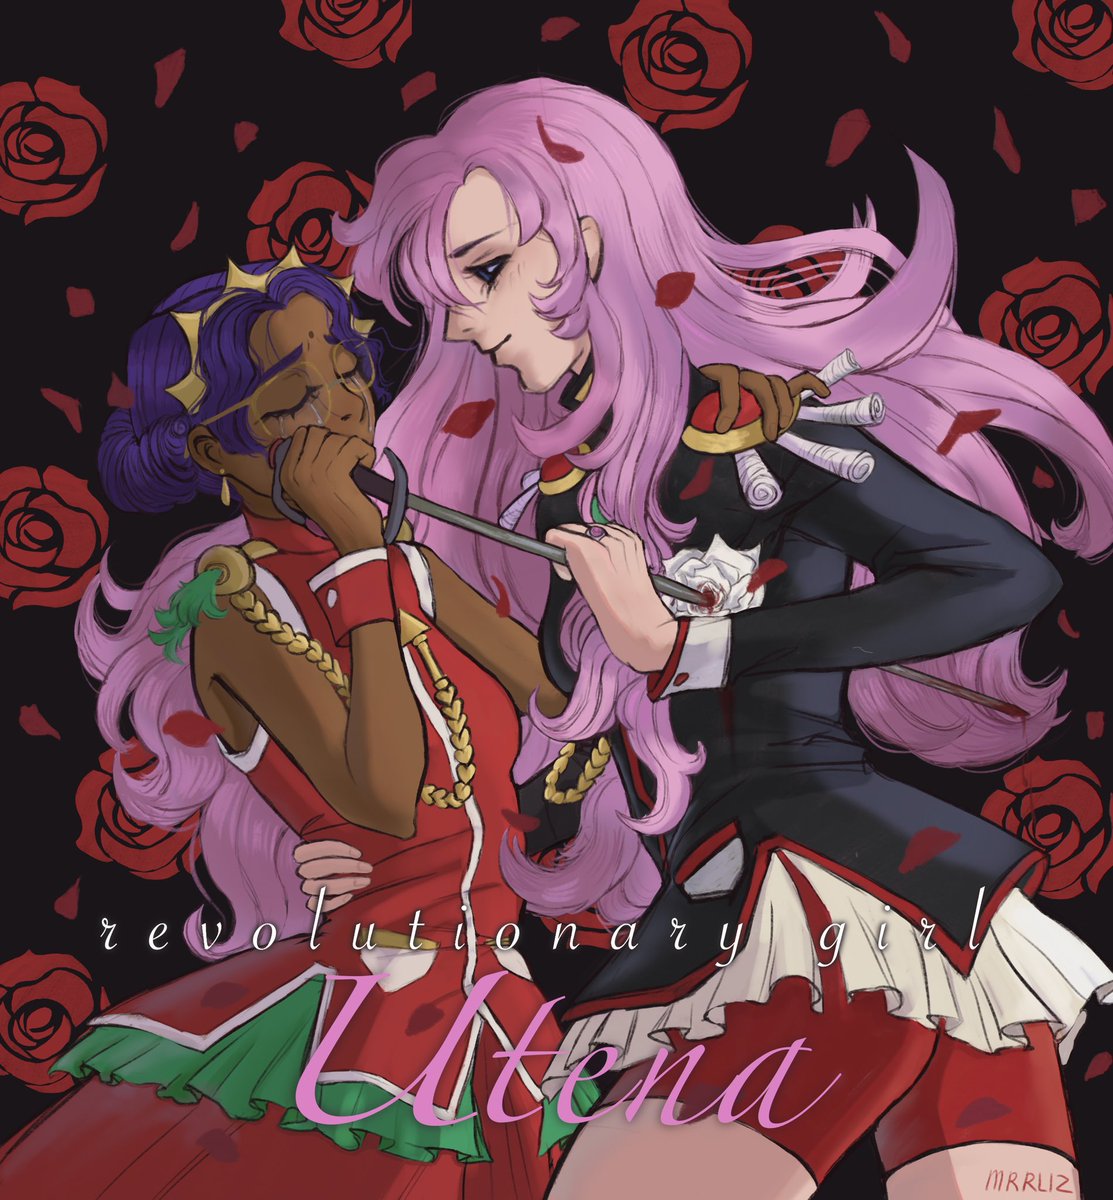 run your sword through me baby, ruin me and then build me up again

#少女革命ウテナ #revolutionarygirlutena #utenanthy #lesbianvisibilityweek